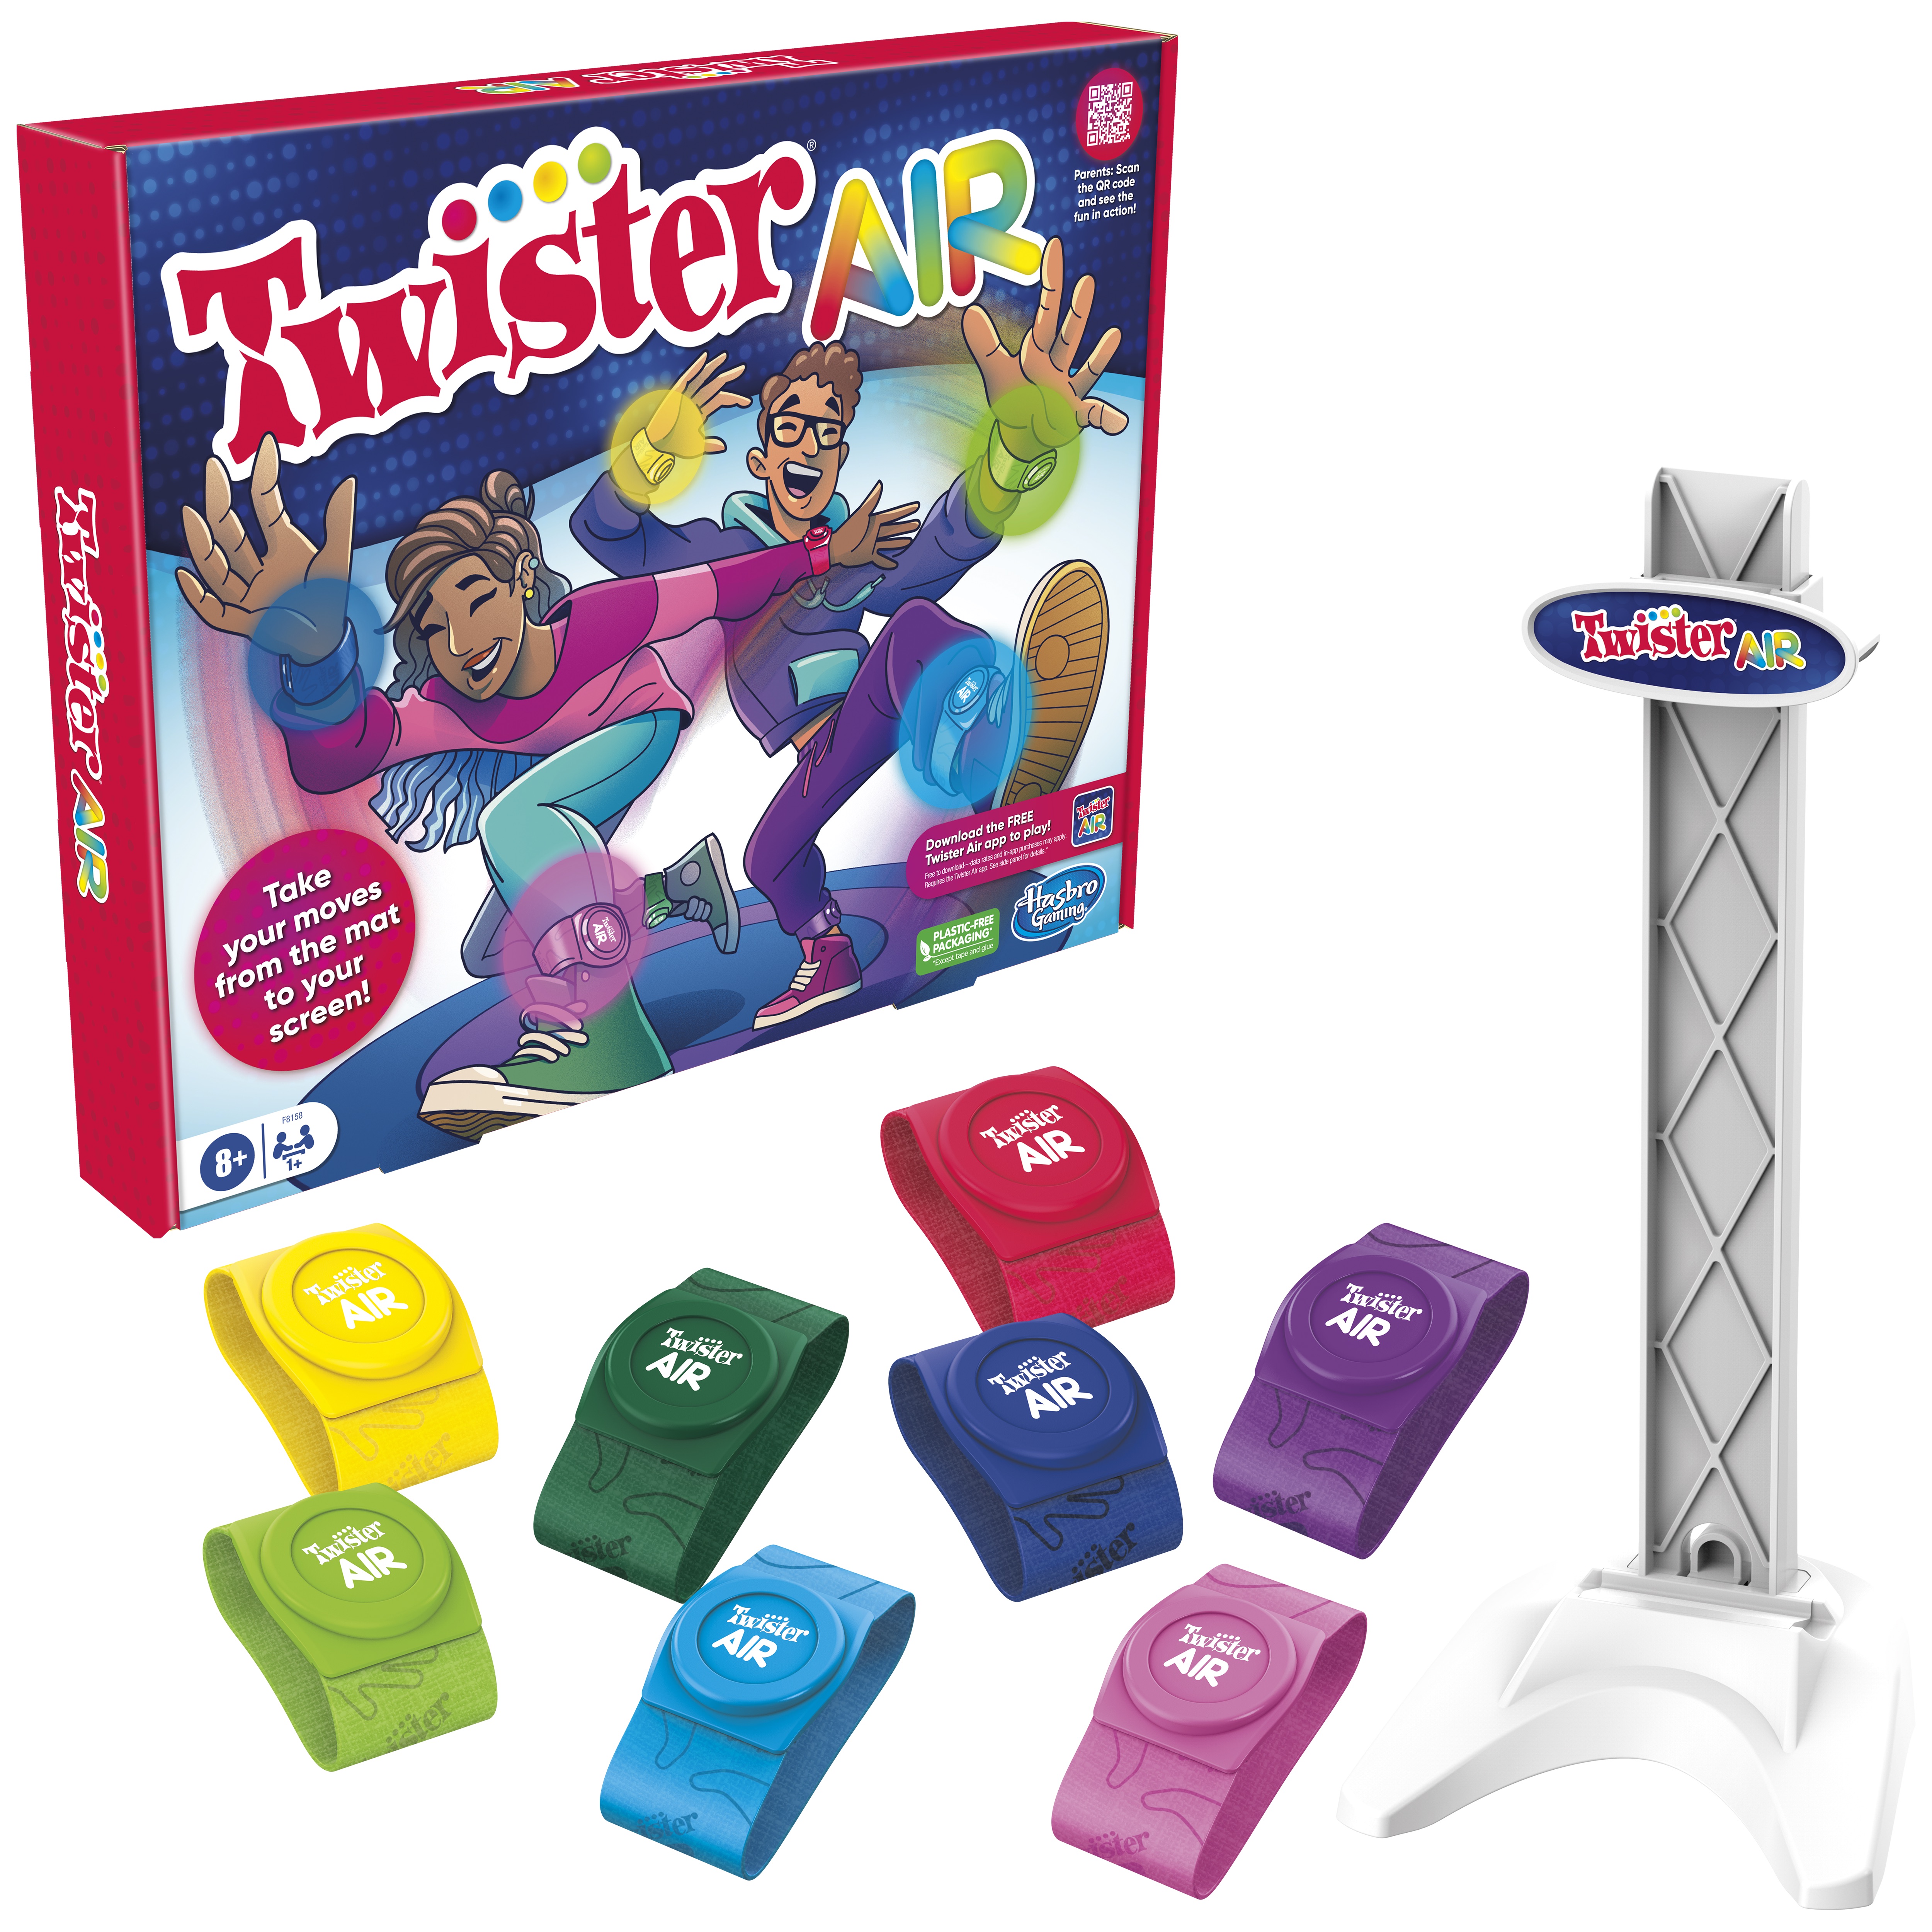 Twister Air product image (Hasbro)